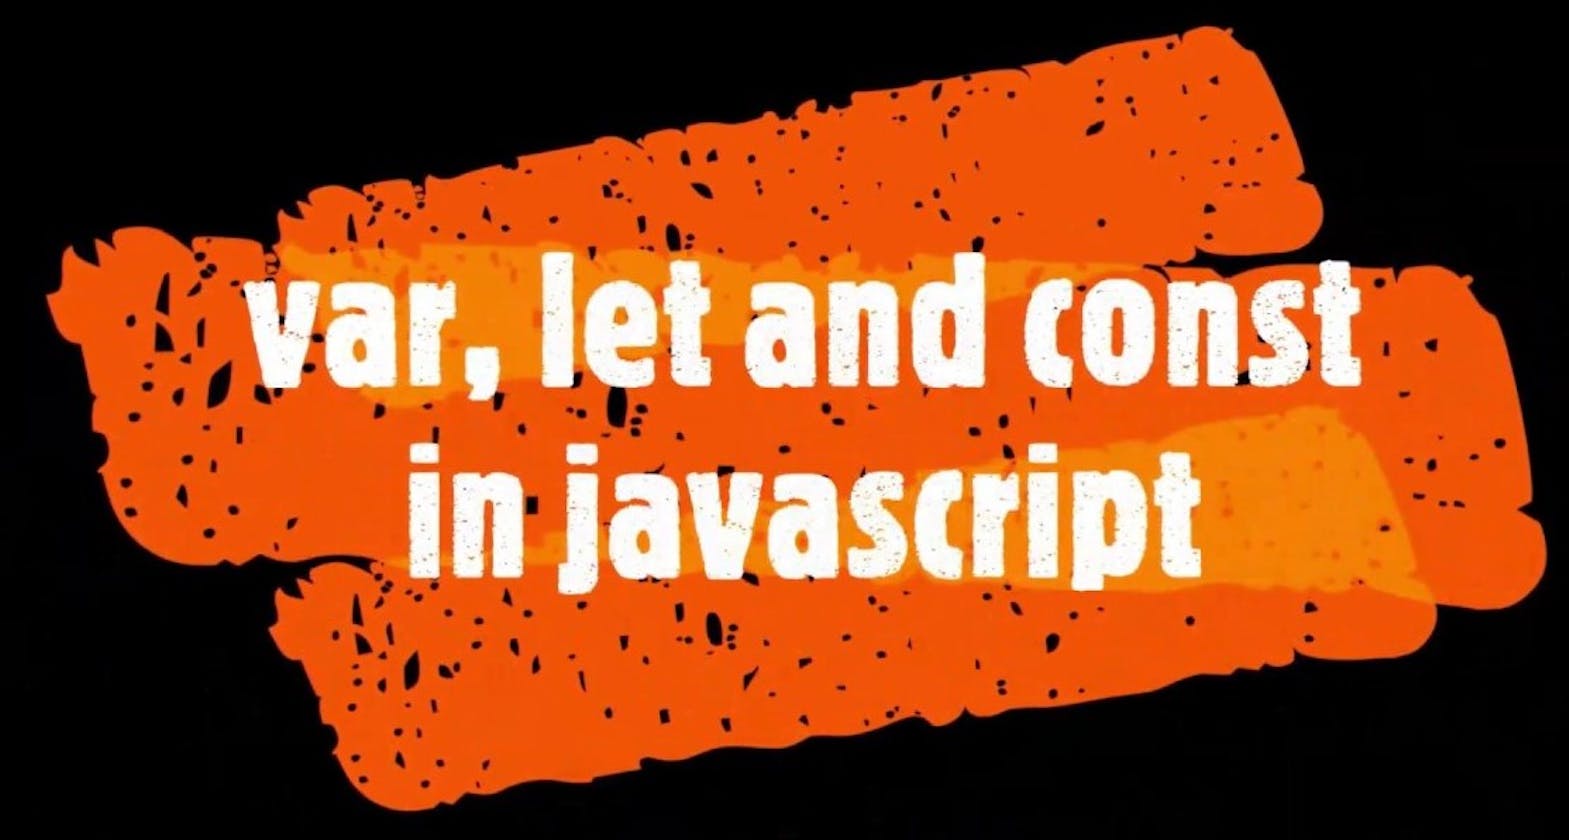 var, let and const in Javascript